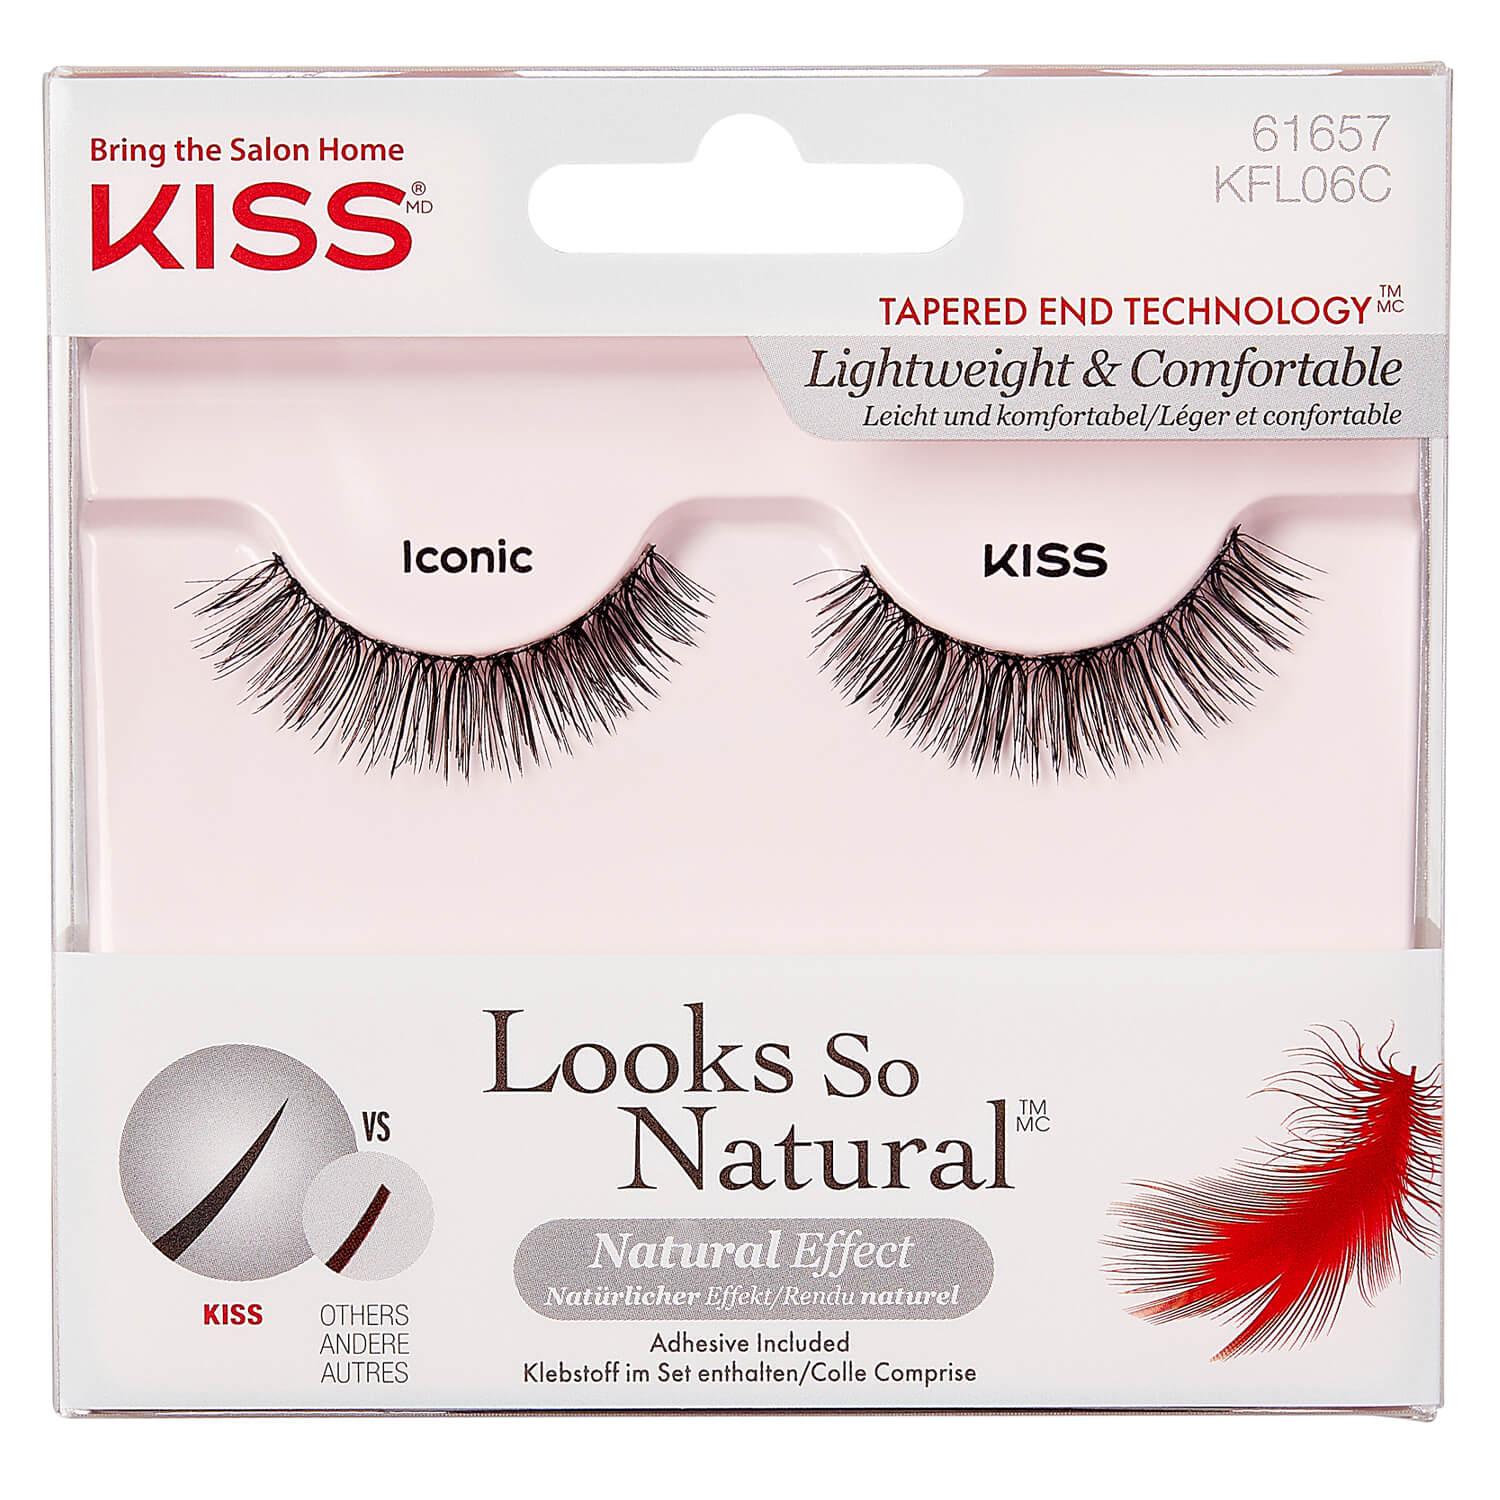 KISS Lashes - Looks So Natural Iconic